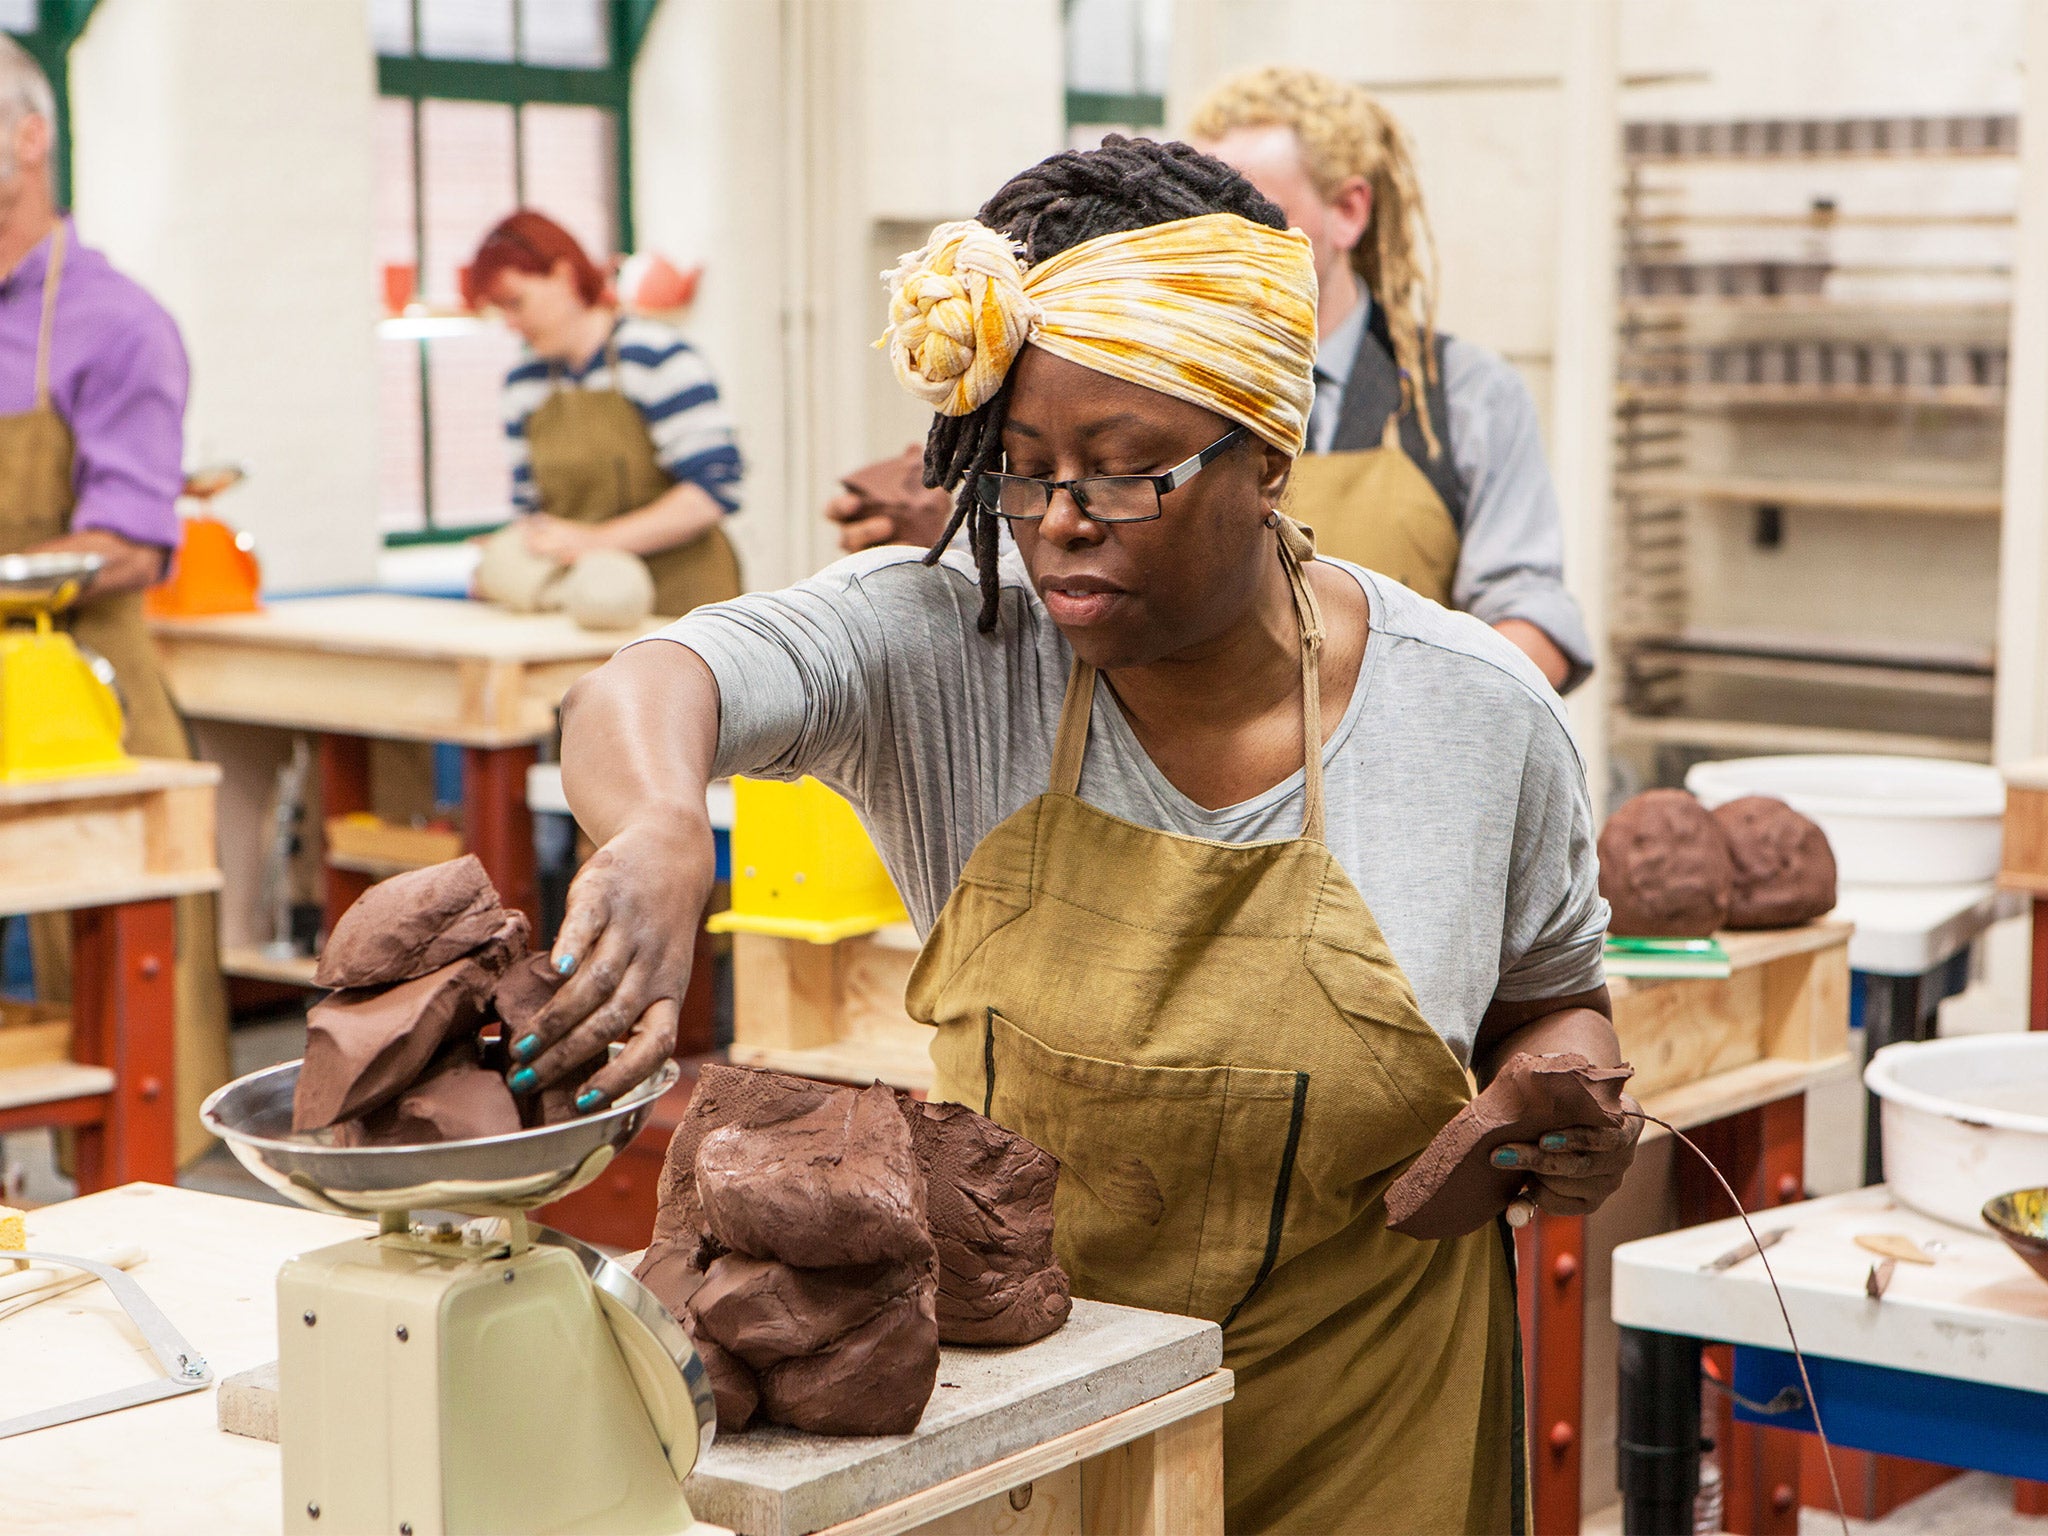 The programme’s amateur potters, such as Sandra, are all nice, normal people, which makes for comforting viewing